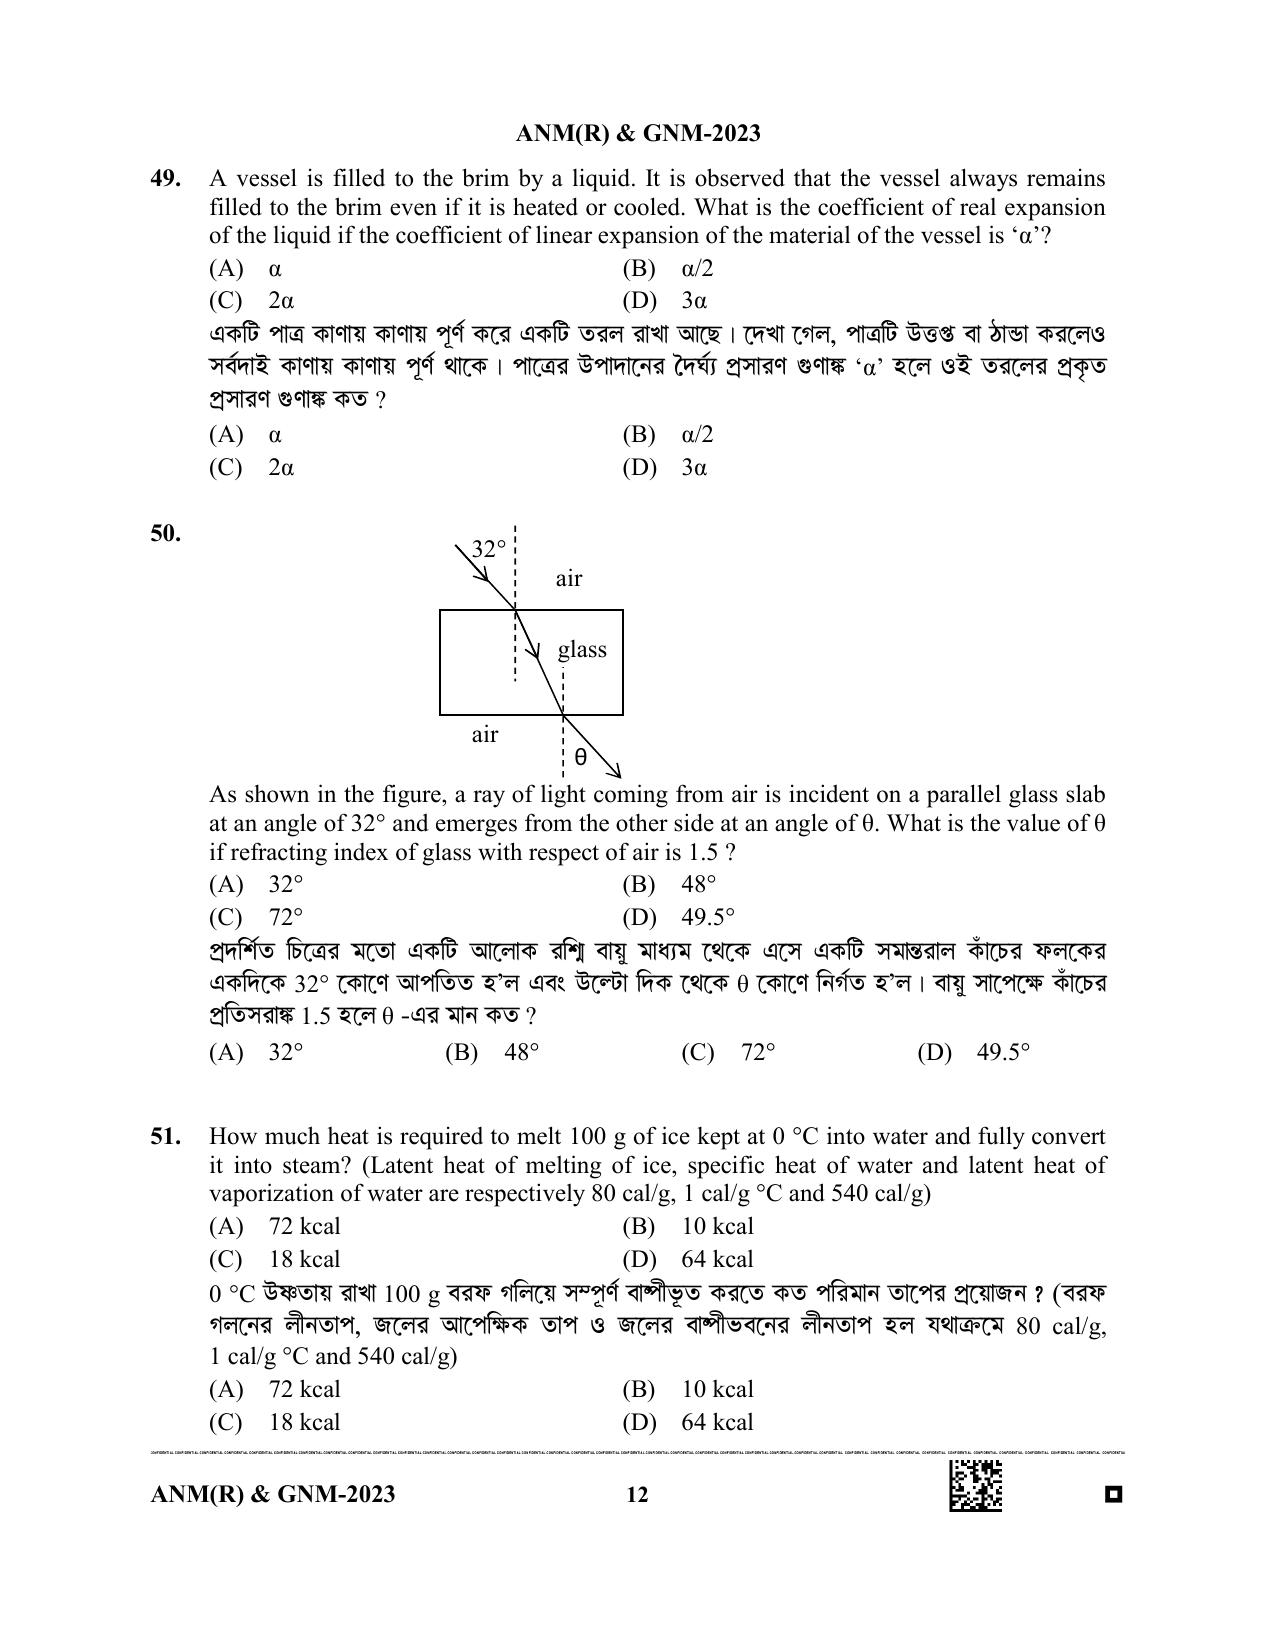 WB ANM GNM 2023 Question Paper - Page 12